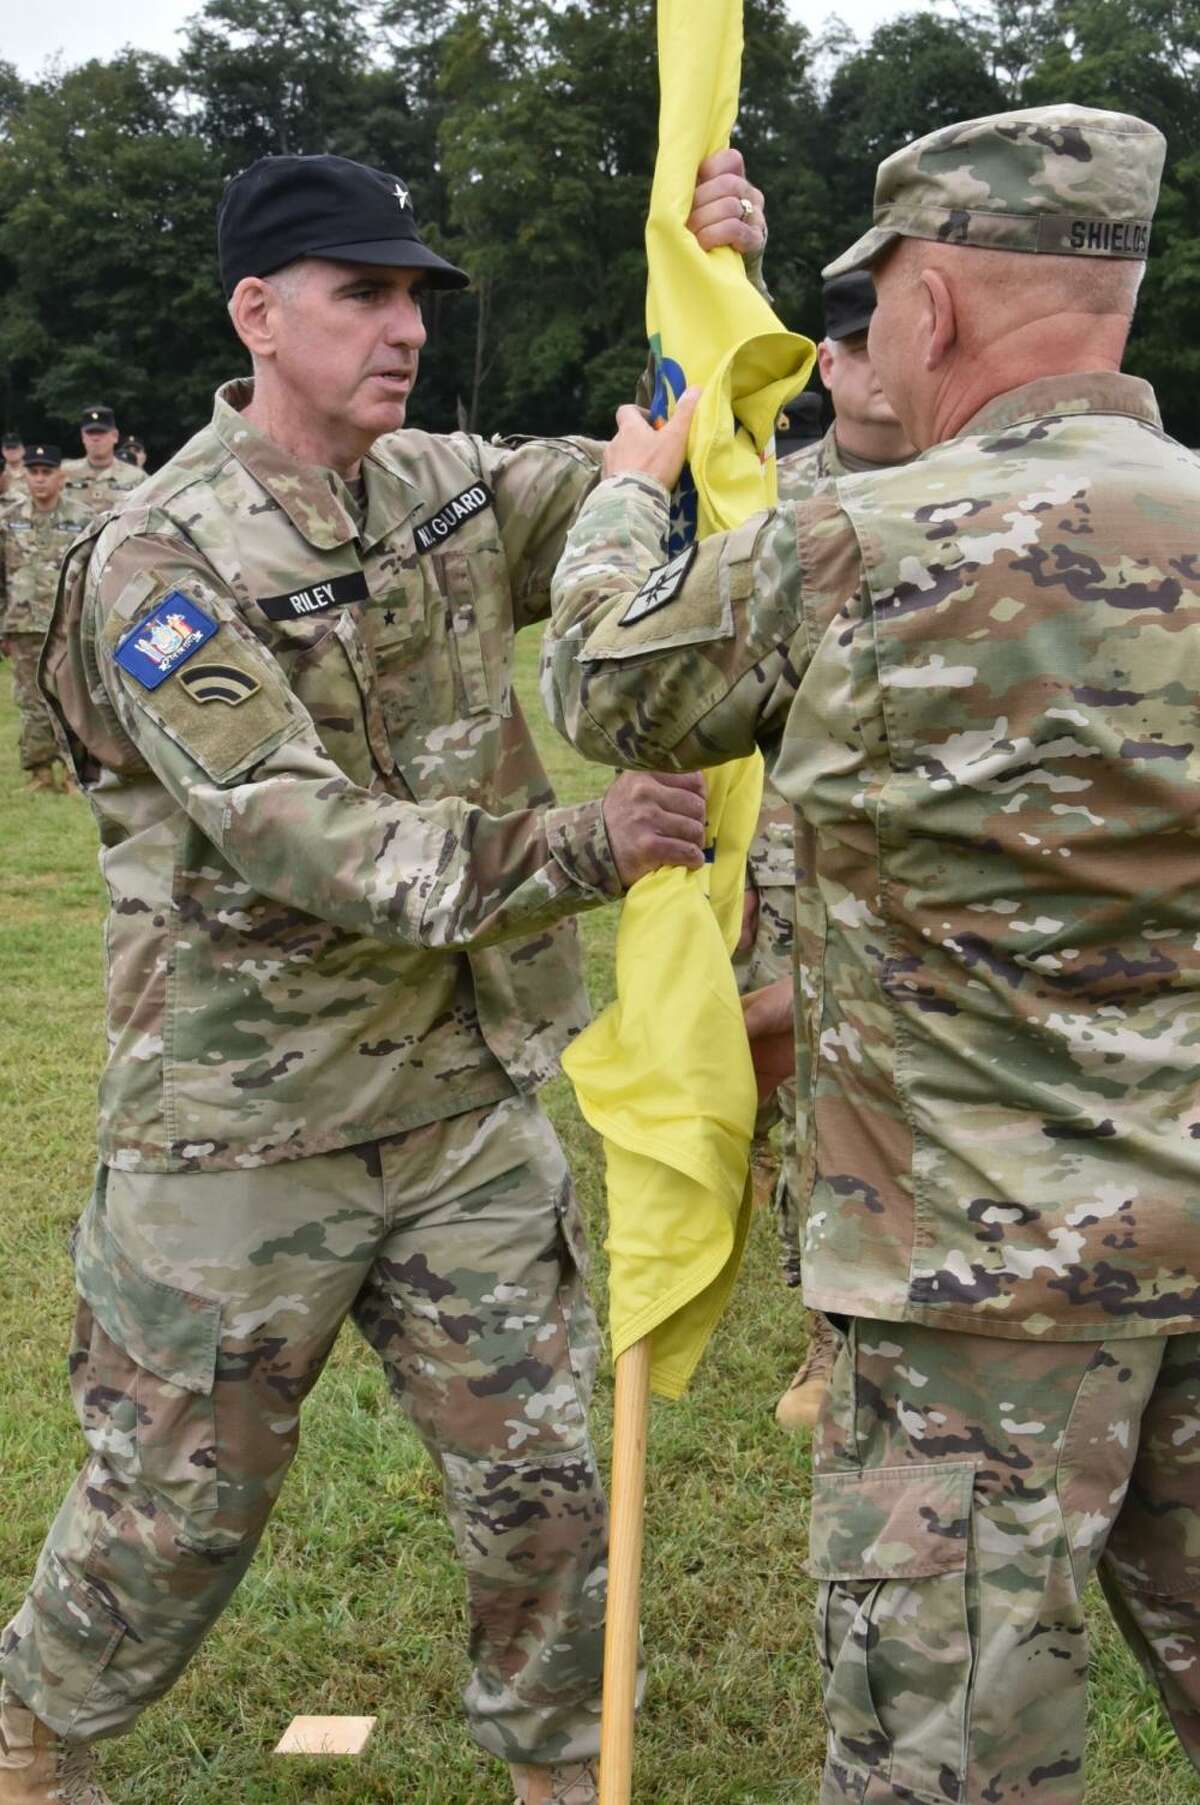  New York Guard Brig. Gen. Peter Riley, left,  accepts the colors of the New York Guard from Maj. Gen. Ray Shields, state adjutant general, during a change of command at Camp Smith Training Site near Peekskill.